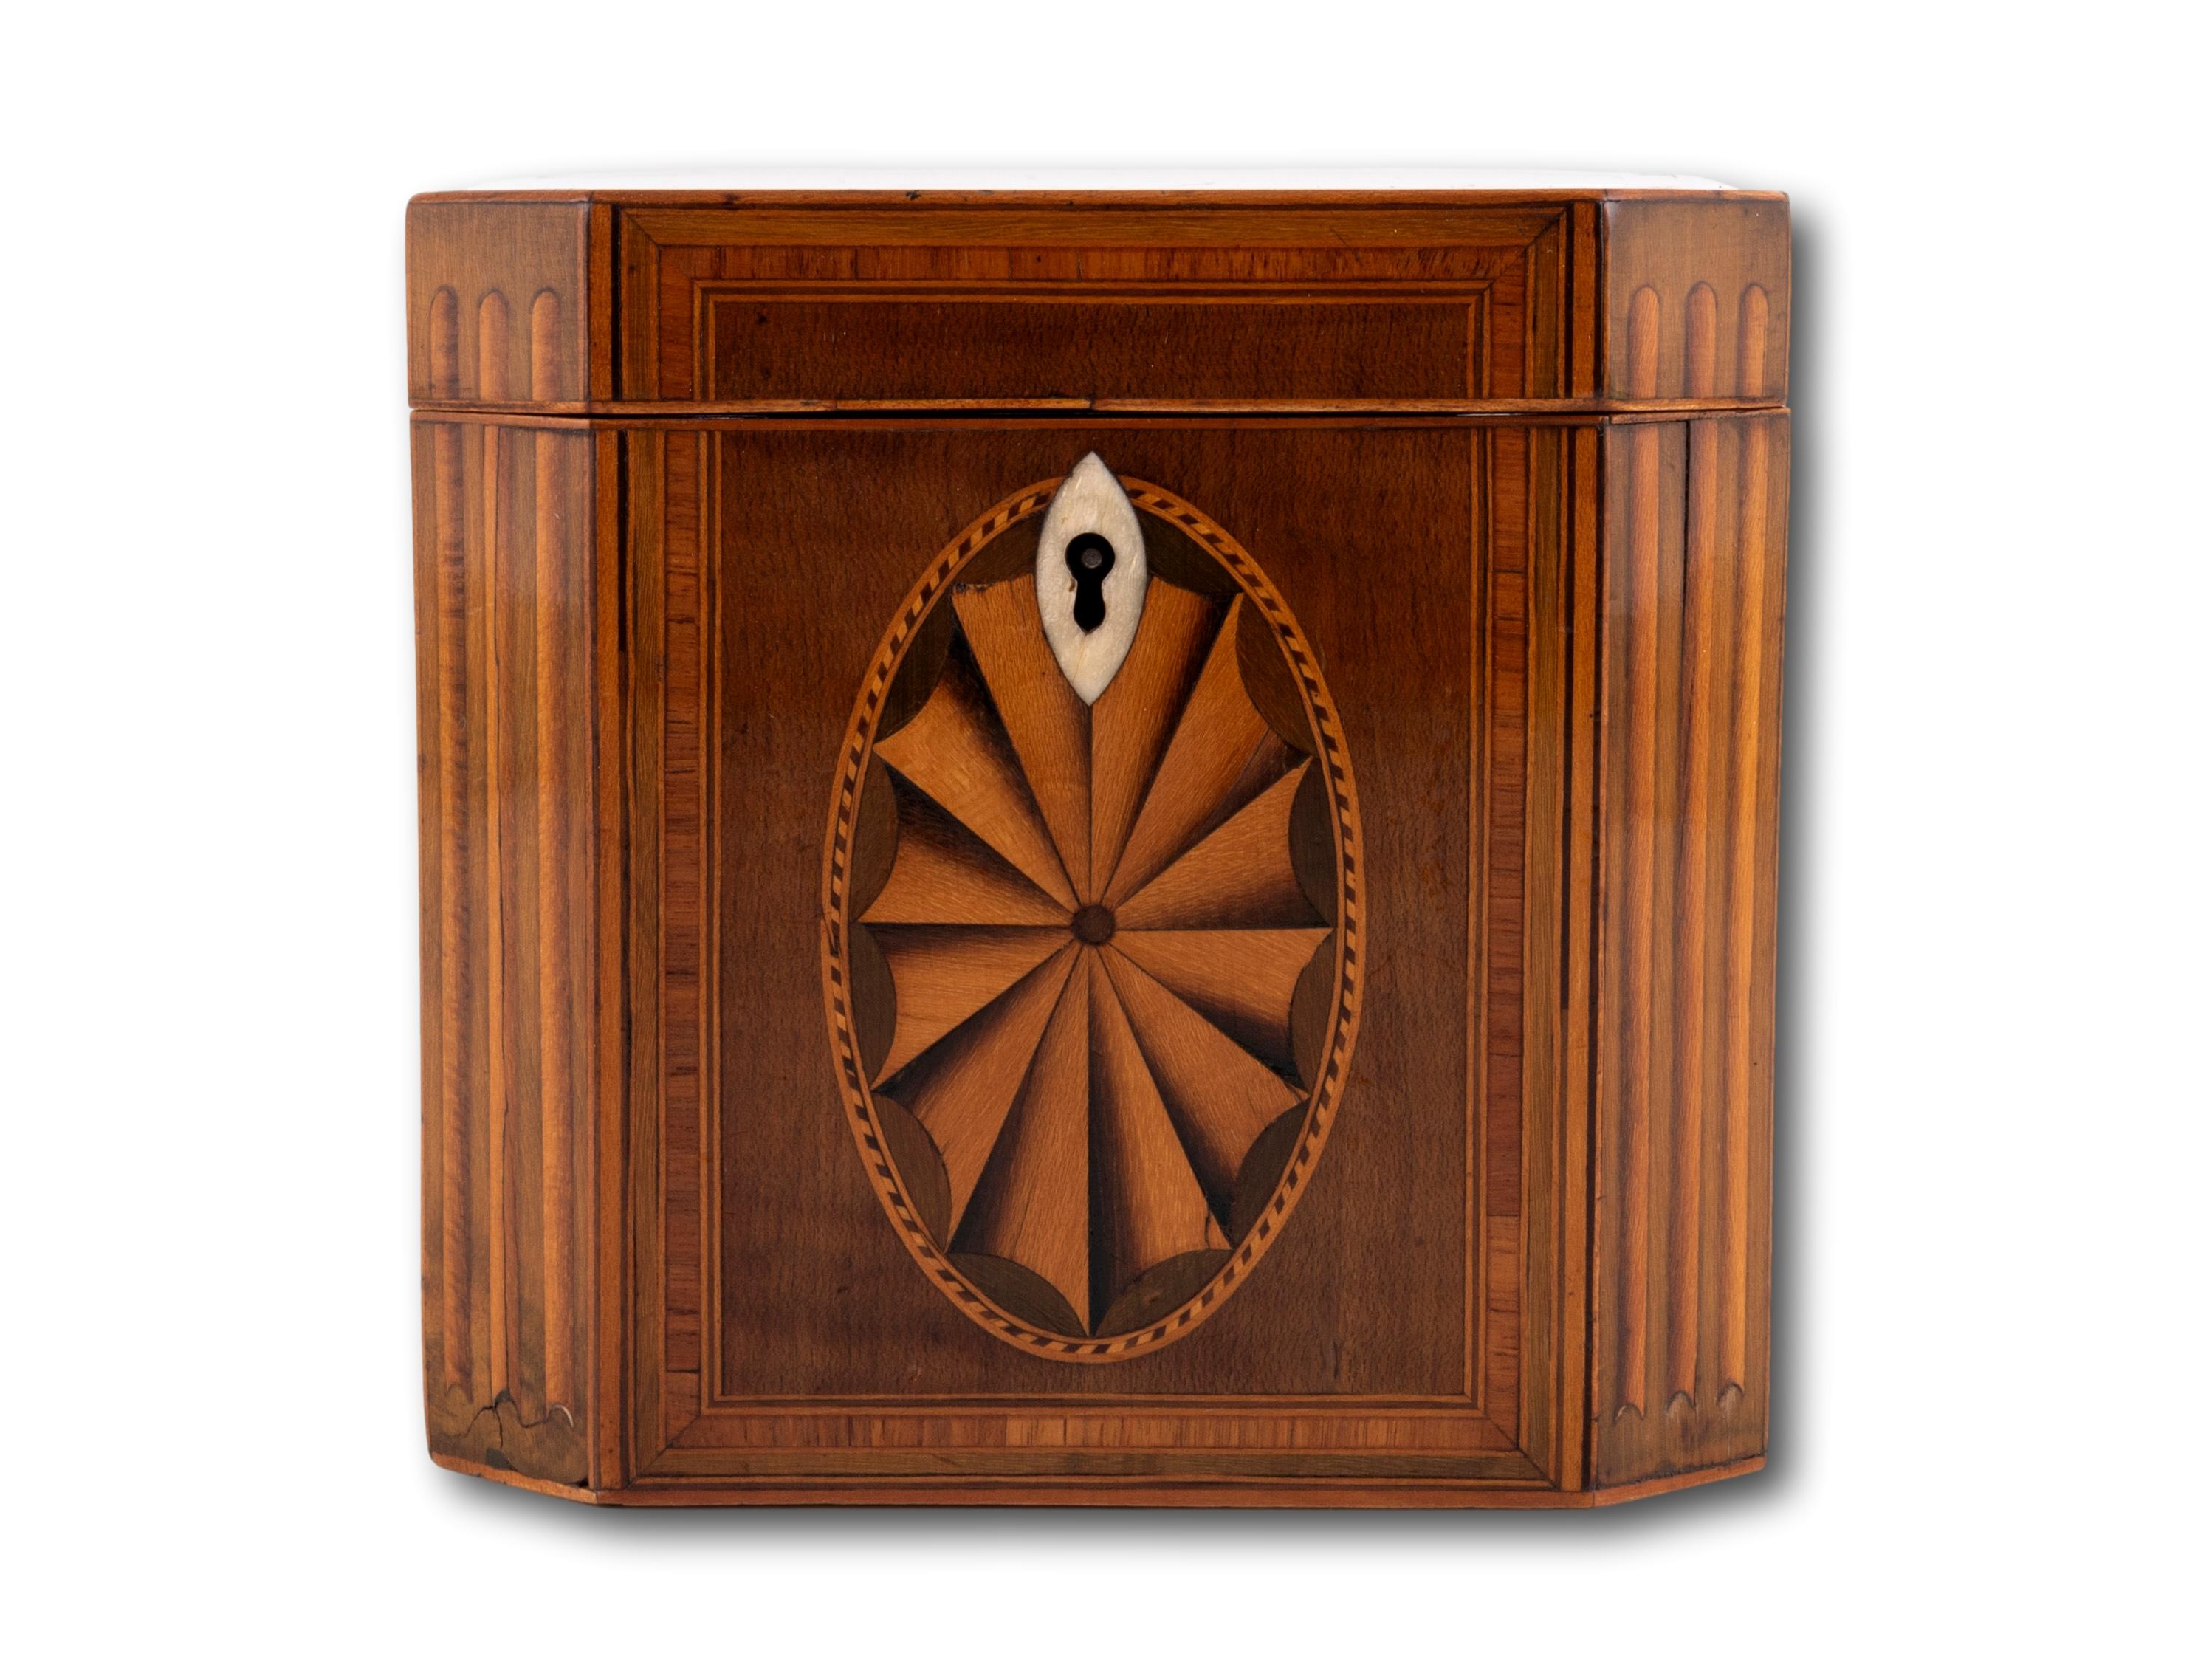 Georgian Tea Caddy featuring the Prince of Wales Feathers with Canted Corners

From our Tea Caddy collection, we are delighted to offer this Georgian Prince of Wales feathers Harewood Tea Caddy. The Tea Caddy of square form with delicately inlaid